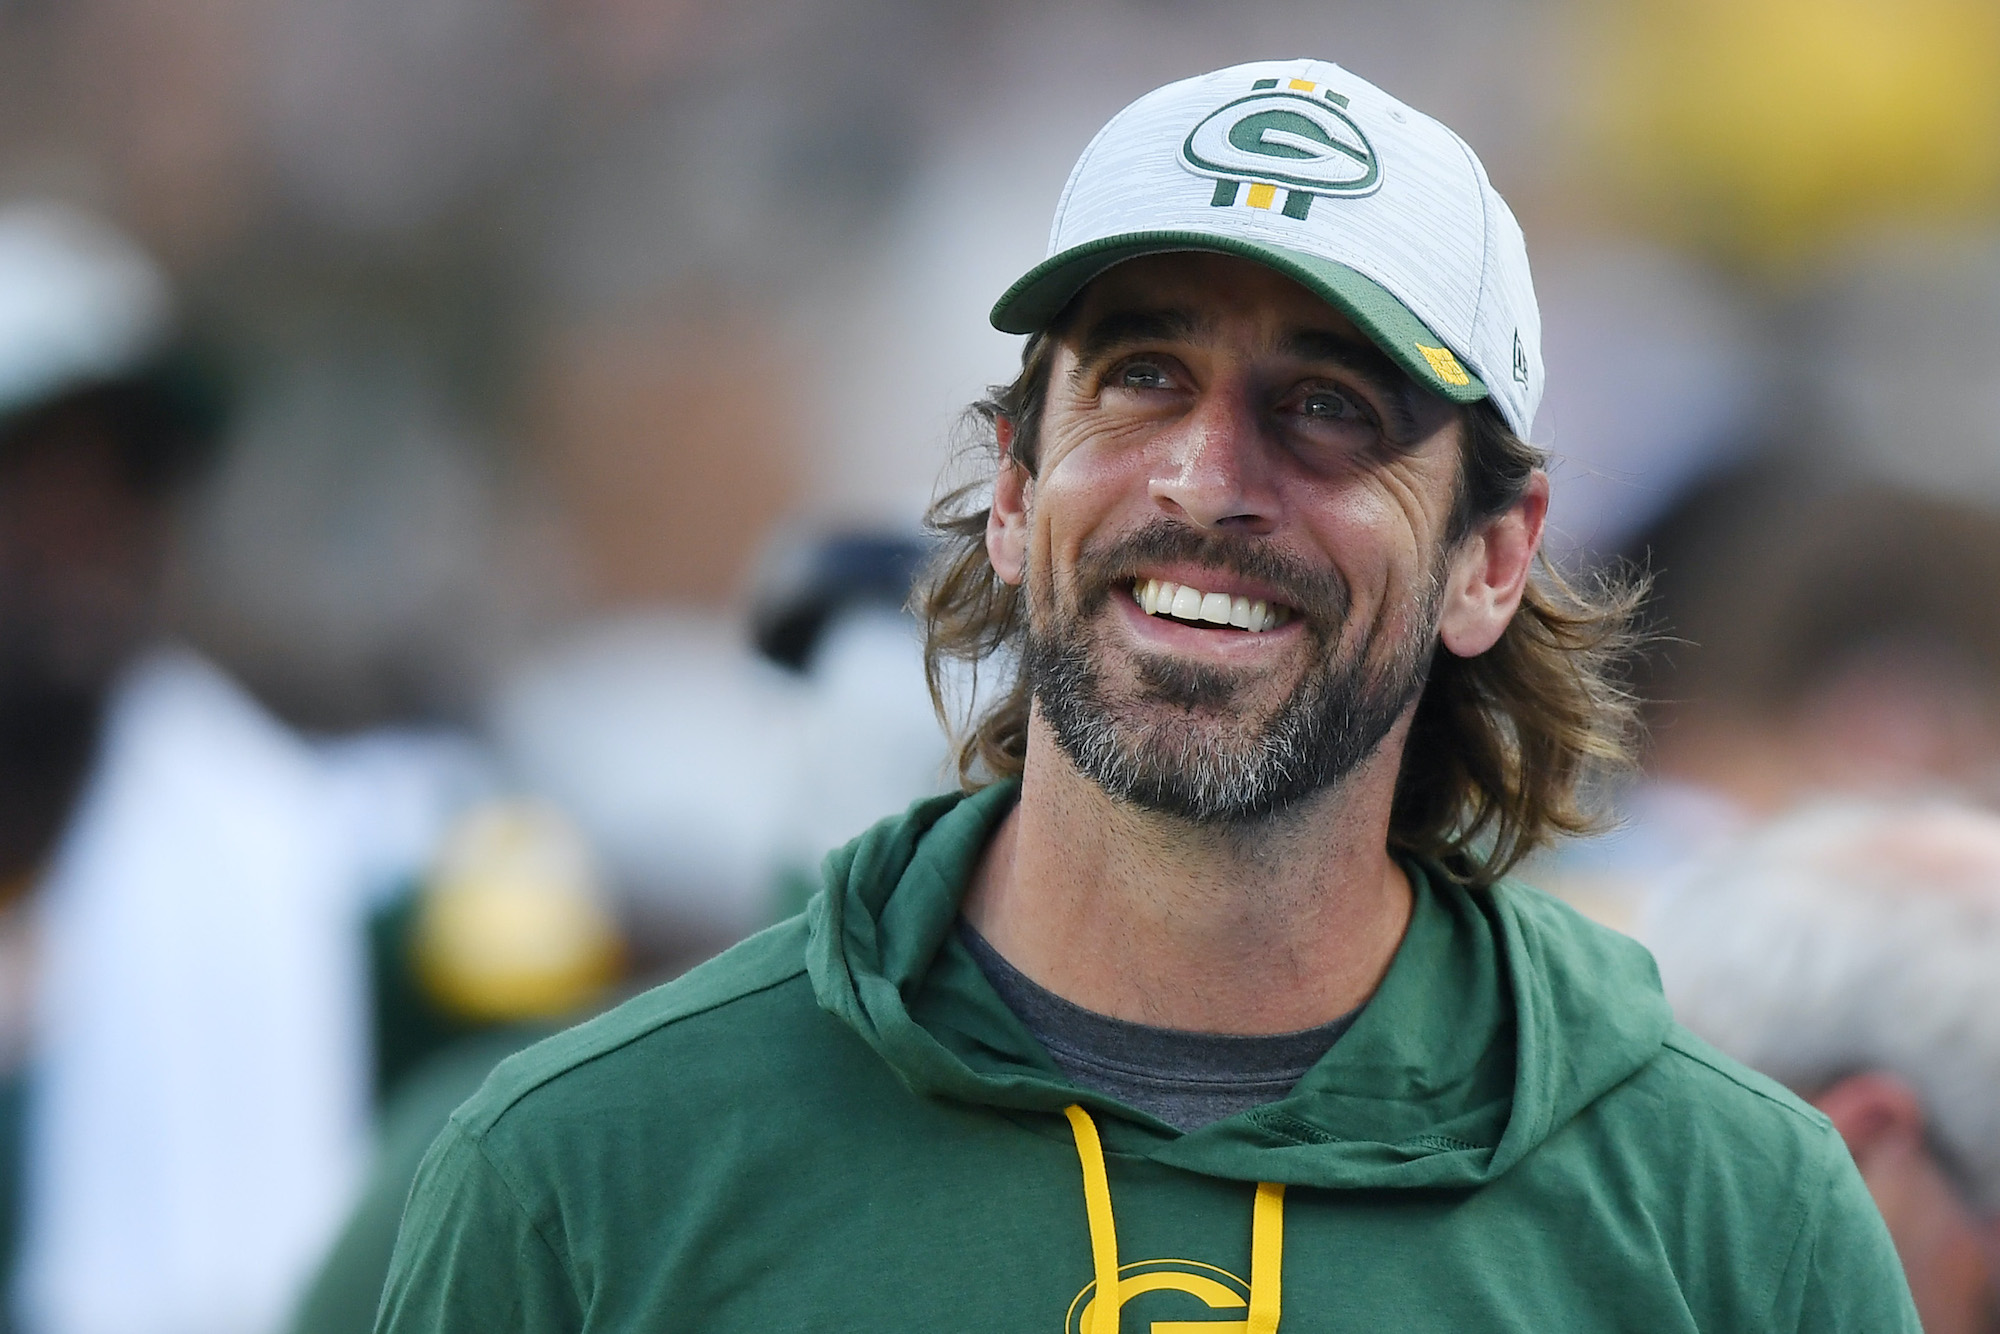 How Old is Aaron Rodgers and Who is His Fiance?